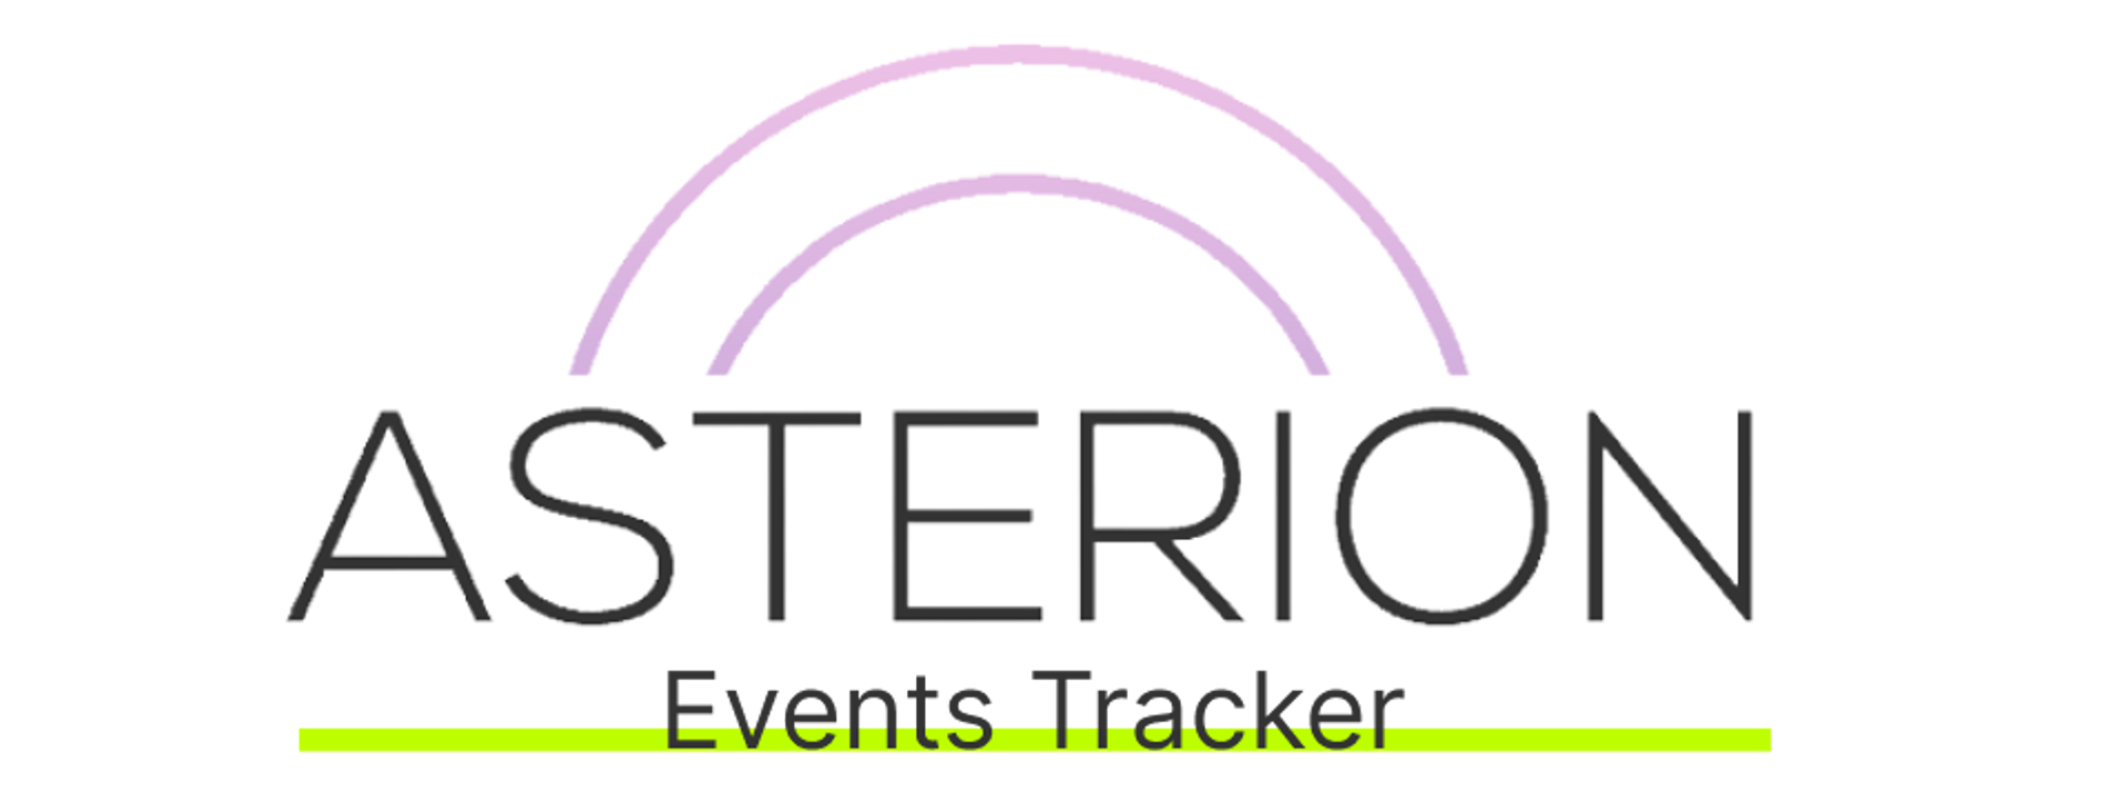 Asterion Events Tracker